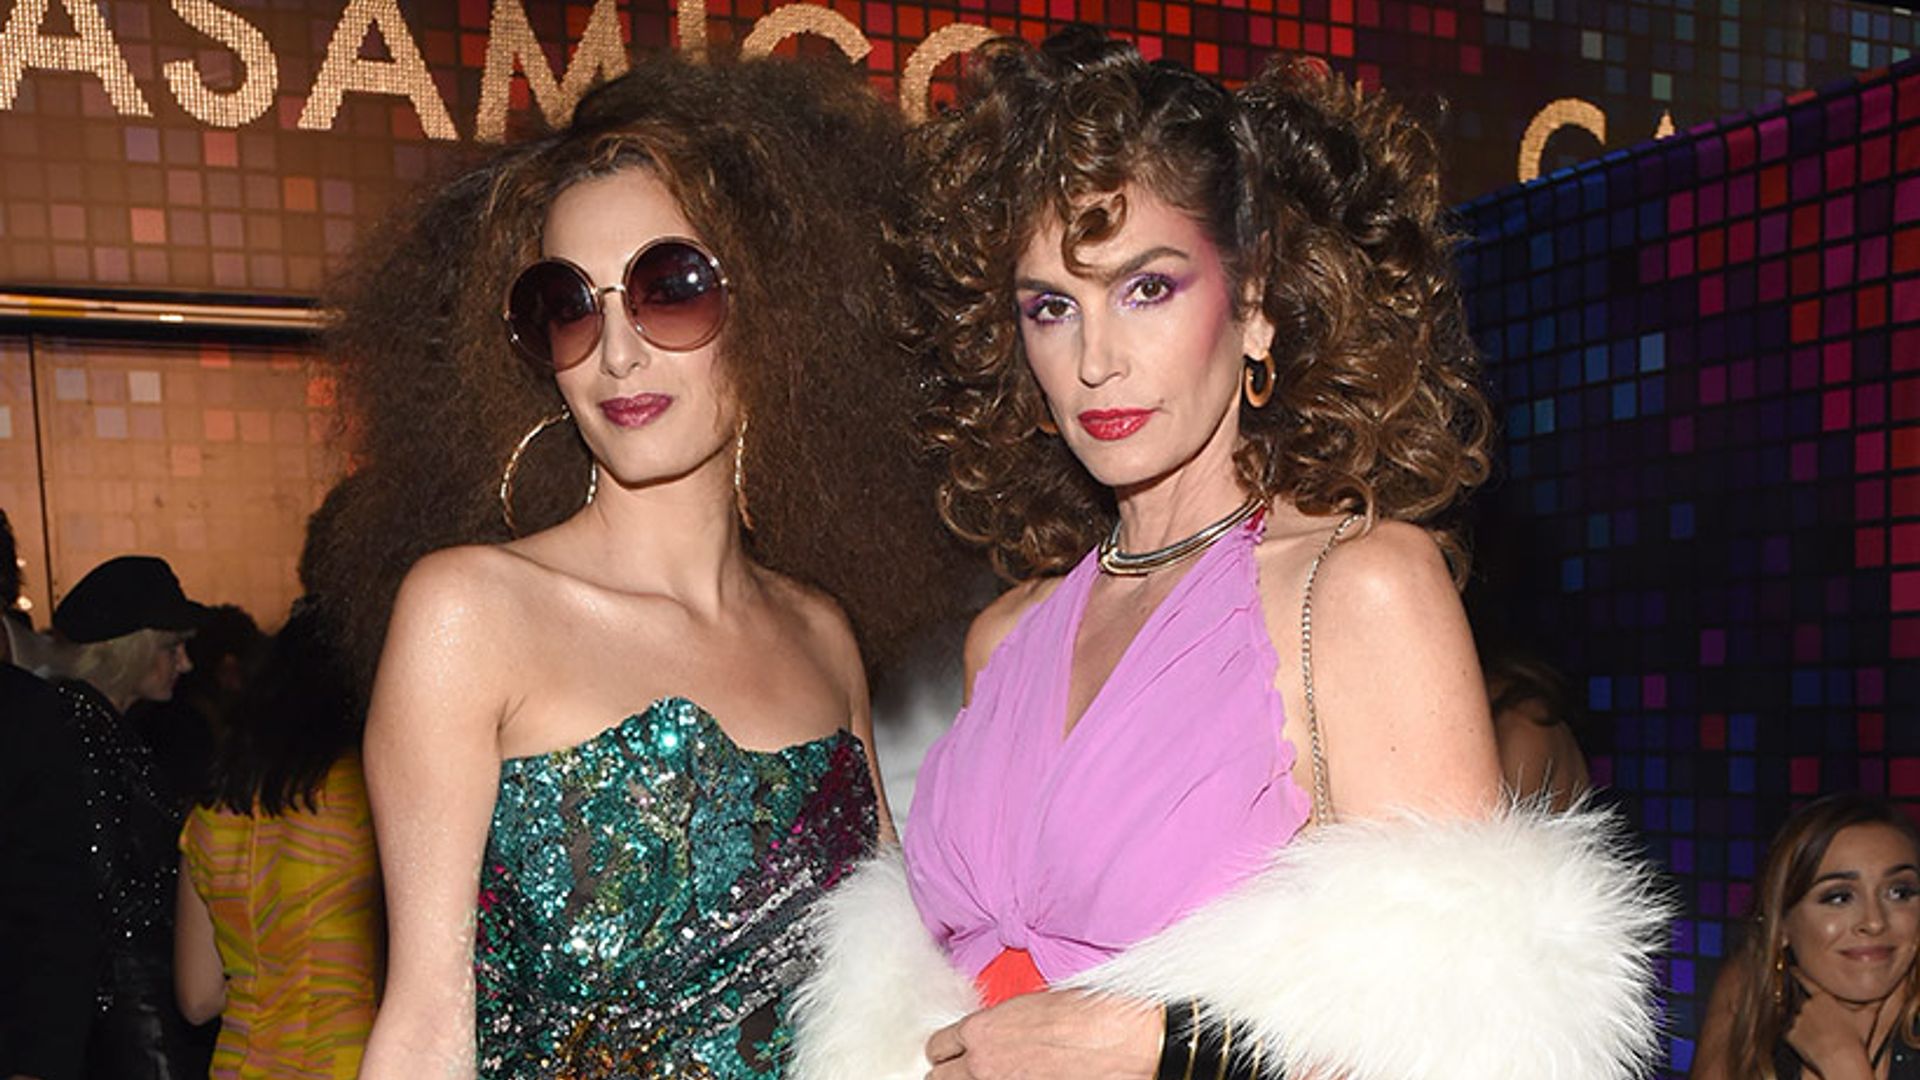 Amal Clooney, Cindy Crawford and stars wow at Casamigos Halloween party – see photos!